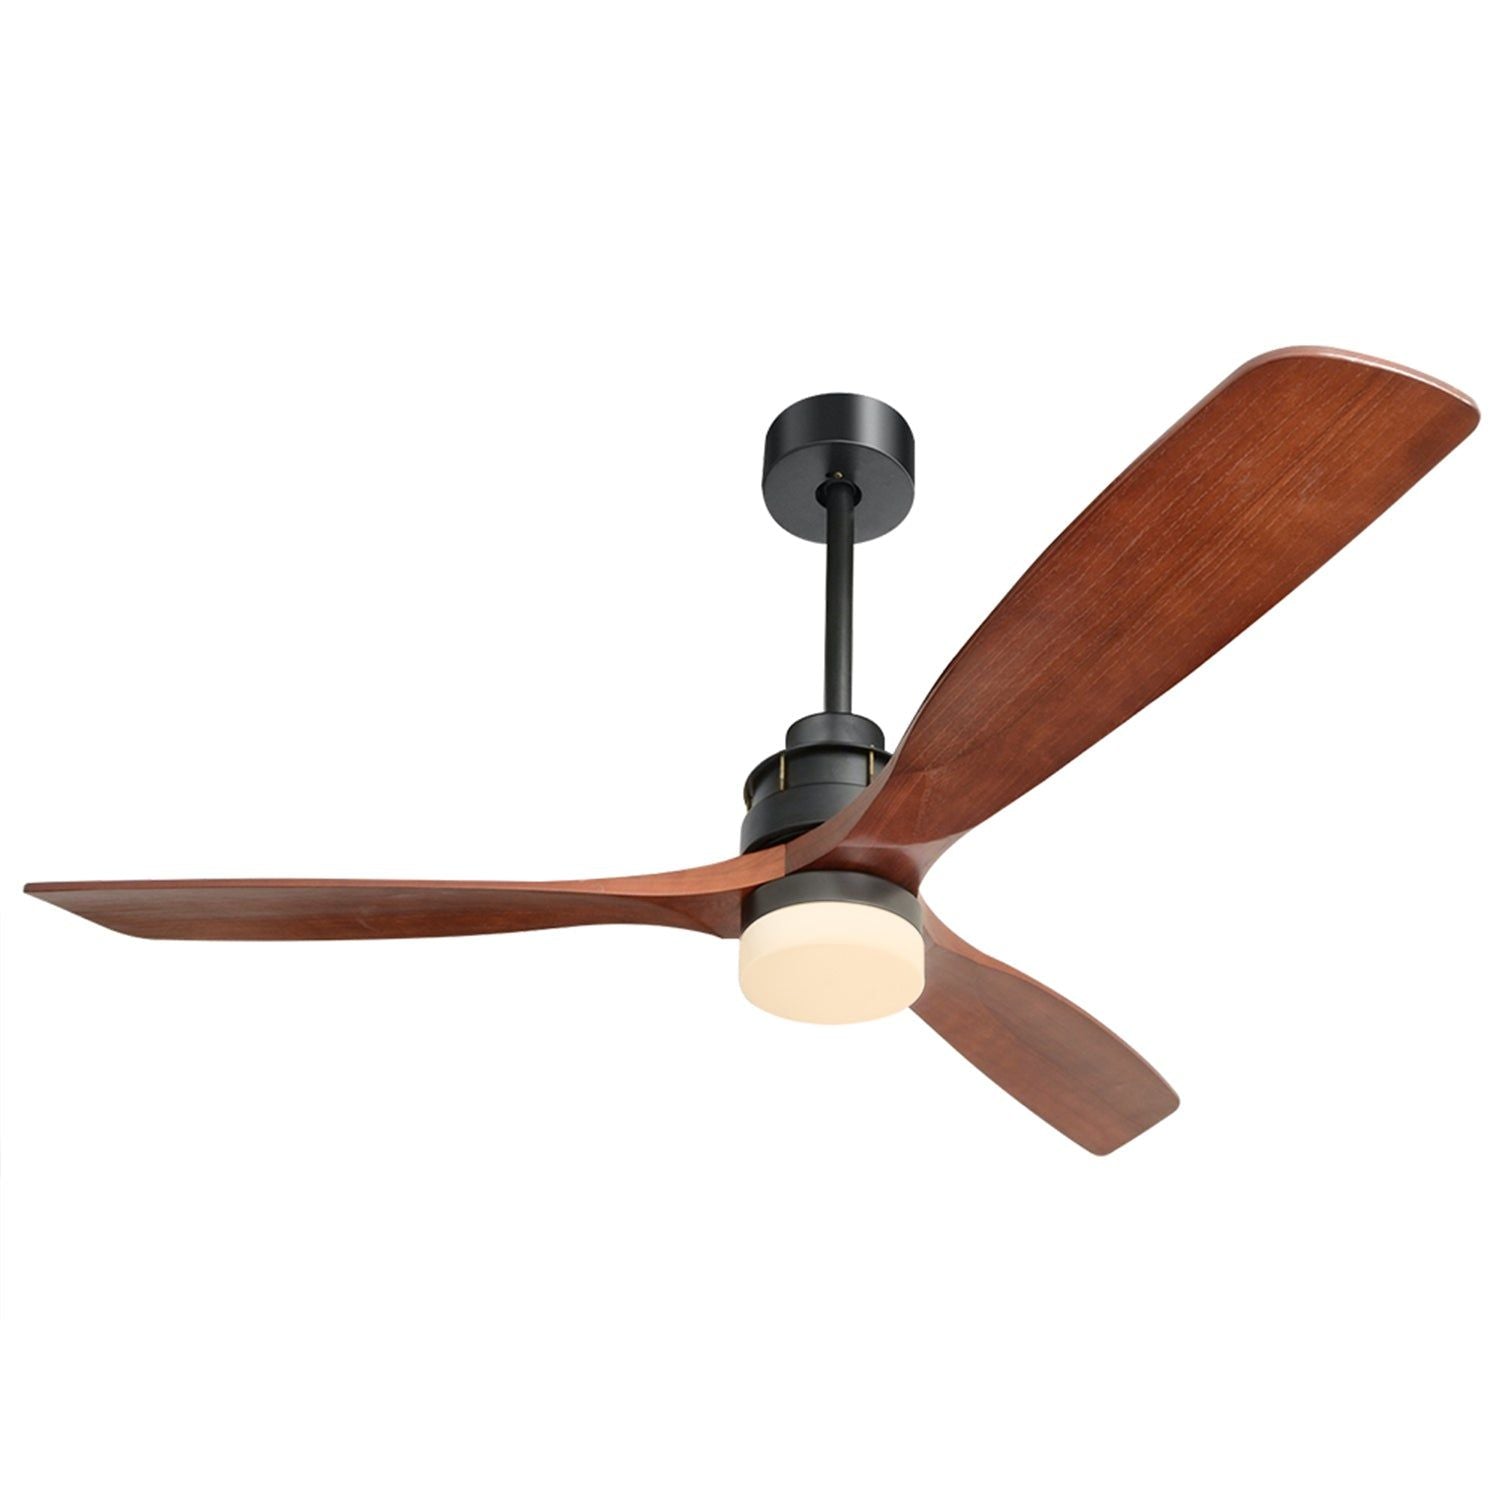 Woody52 Wood Blade Ceiling Fan with LED Light and Remote, 52 Inch, 6-Speed Reversible - Matte Black, Walnut